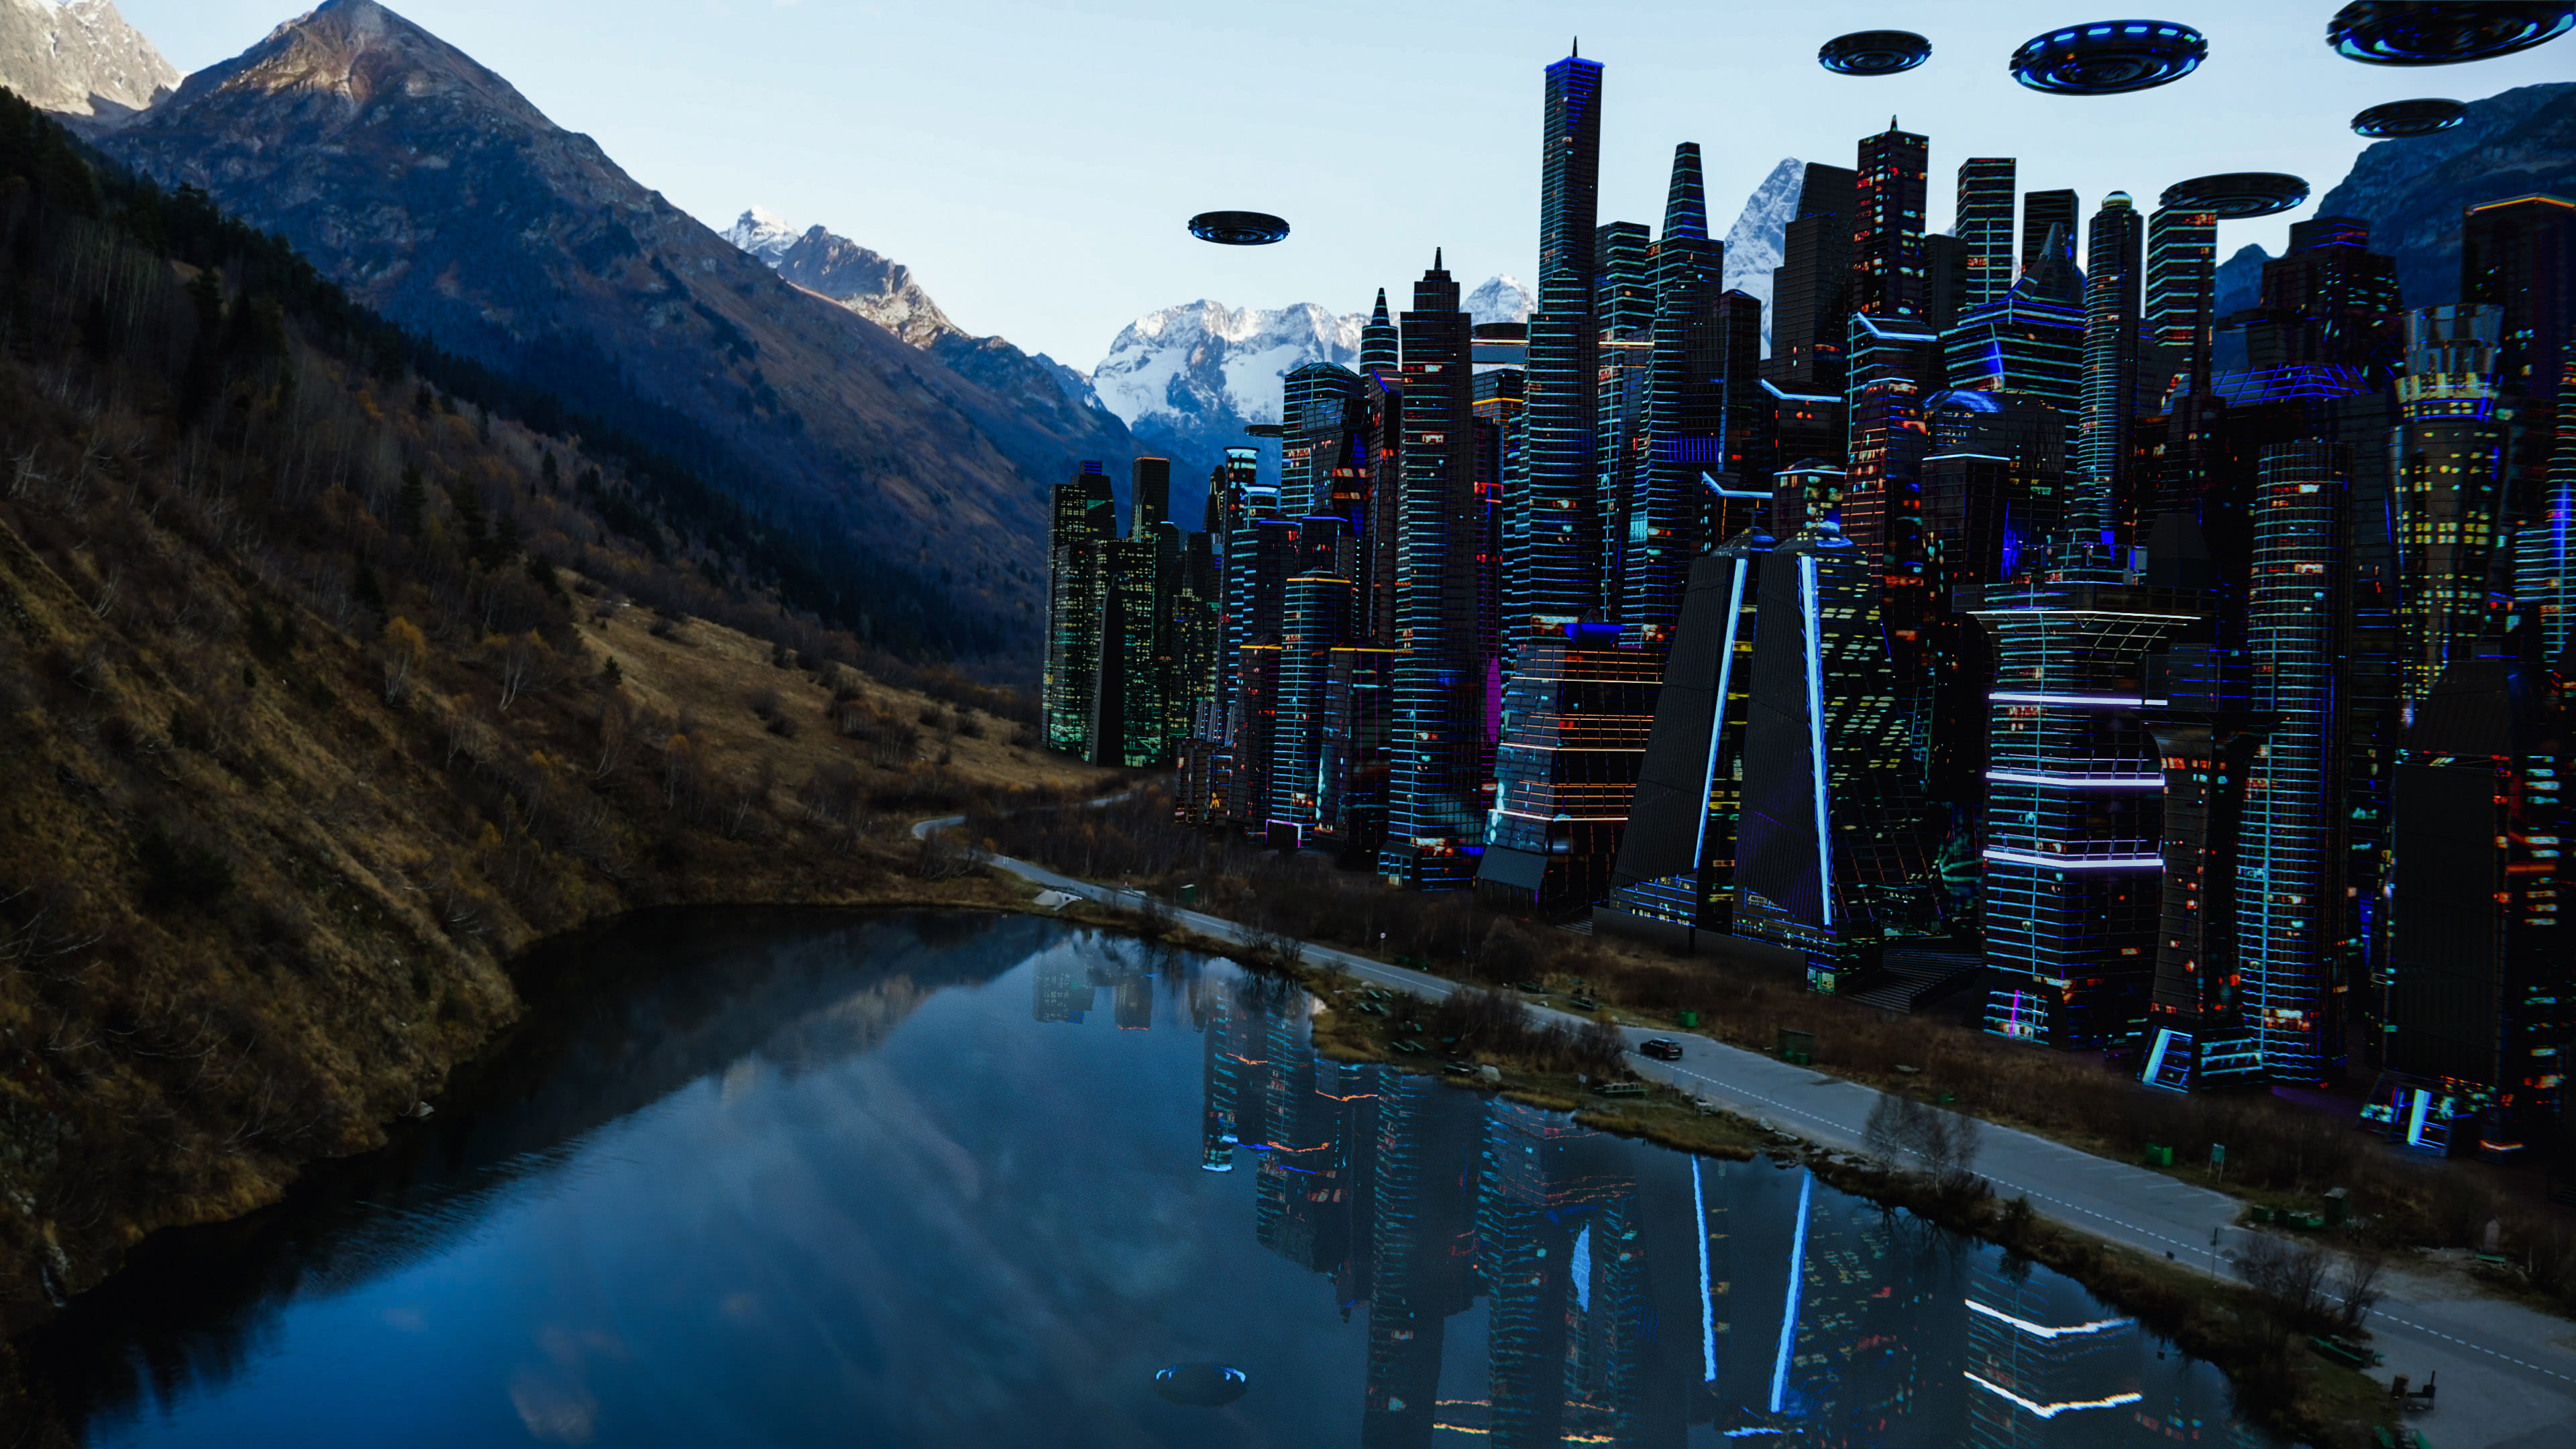 Image of a vast mountainous landscape fused with science-fiction inspired computer-generated imagery.